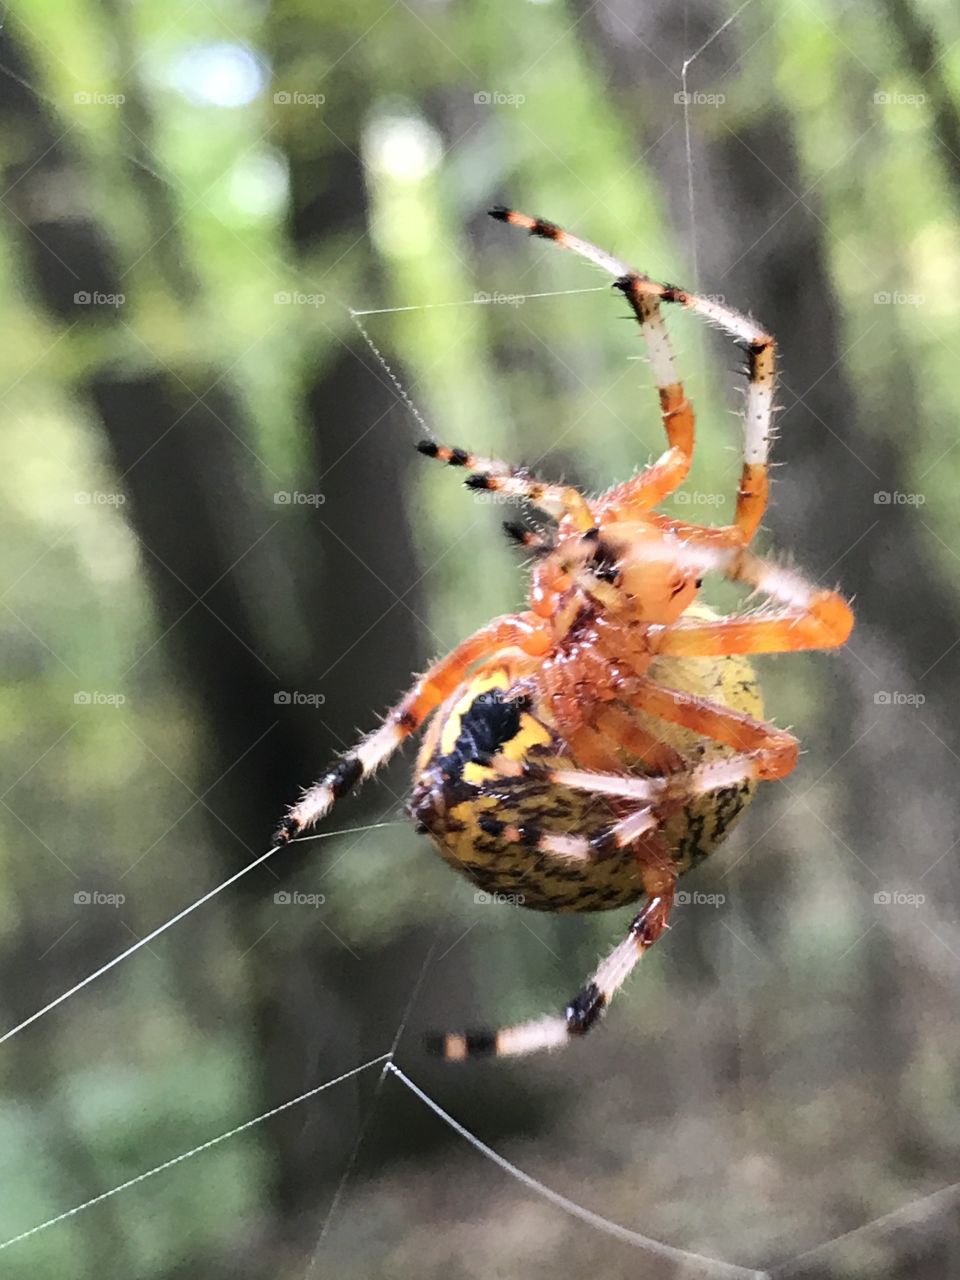 The Cone Weaver spider making its web. 